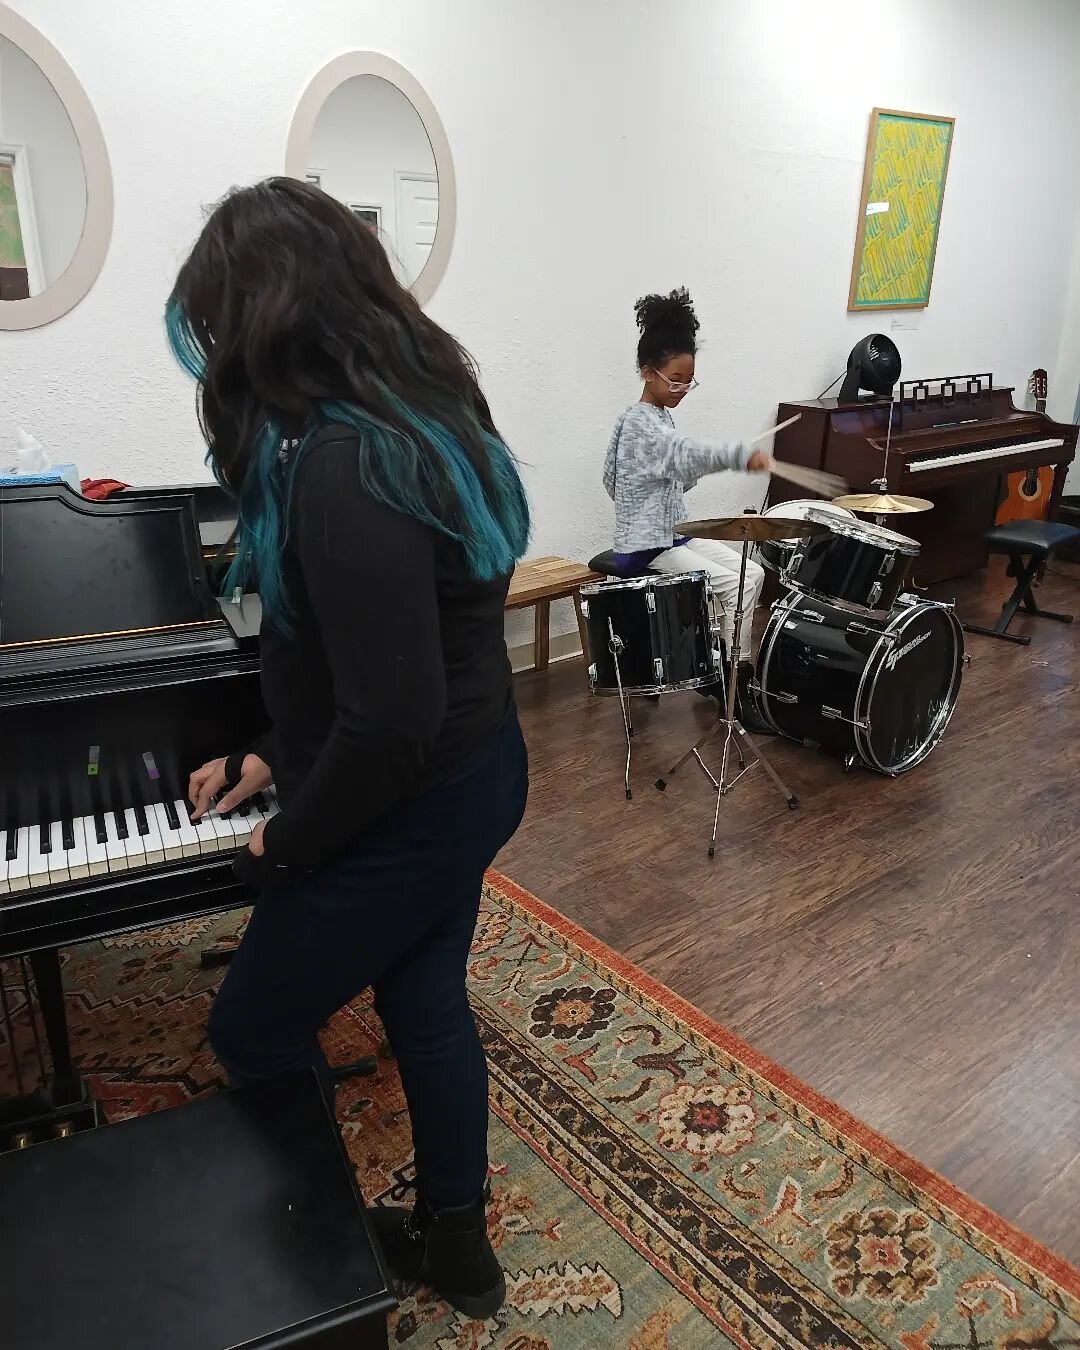 We love when we get to see our kiddos practice and jam together!
.
#newcottagearts #newcottageartsdenver #music #musiclessons #musicclasses